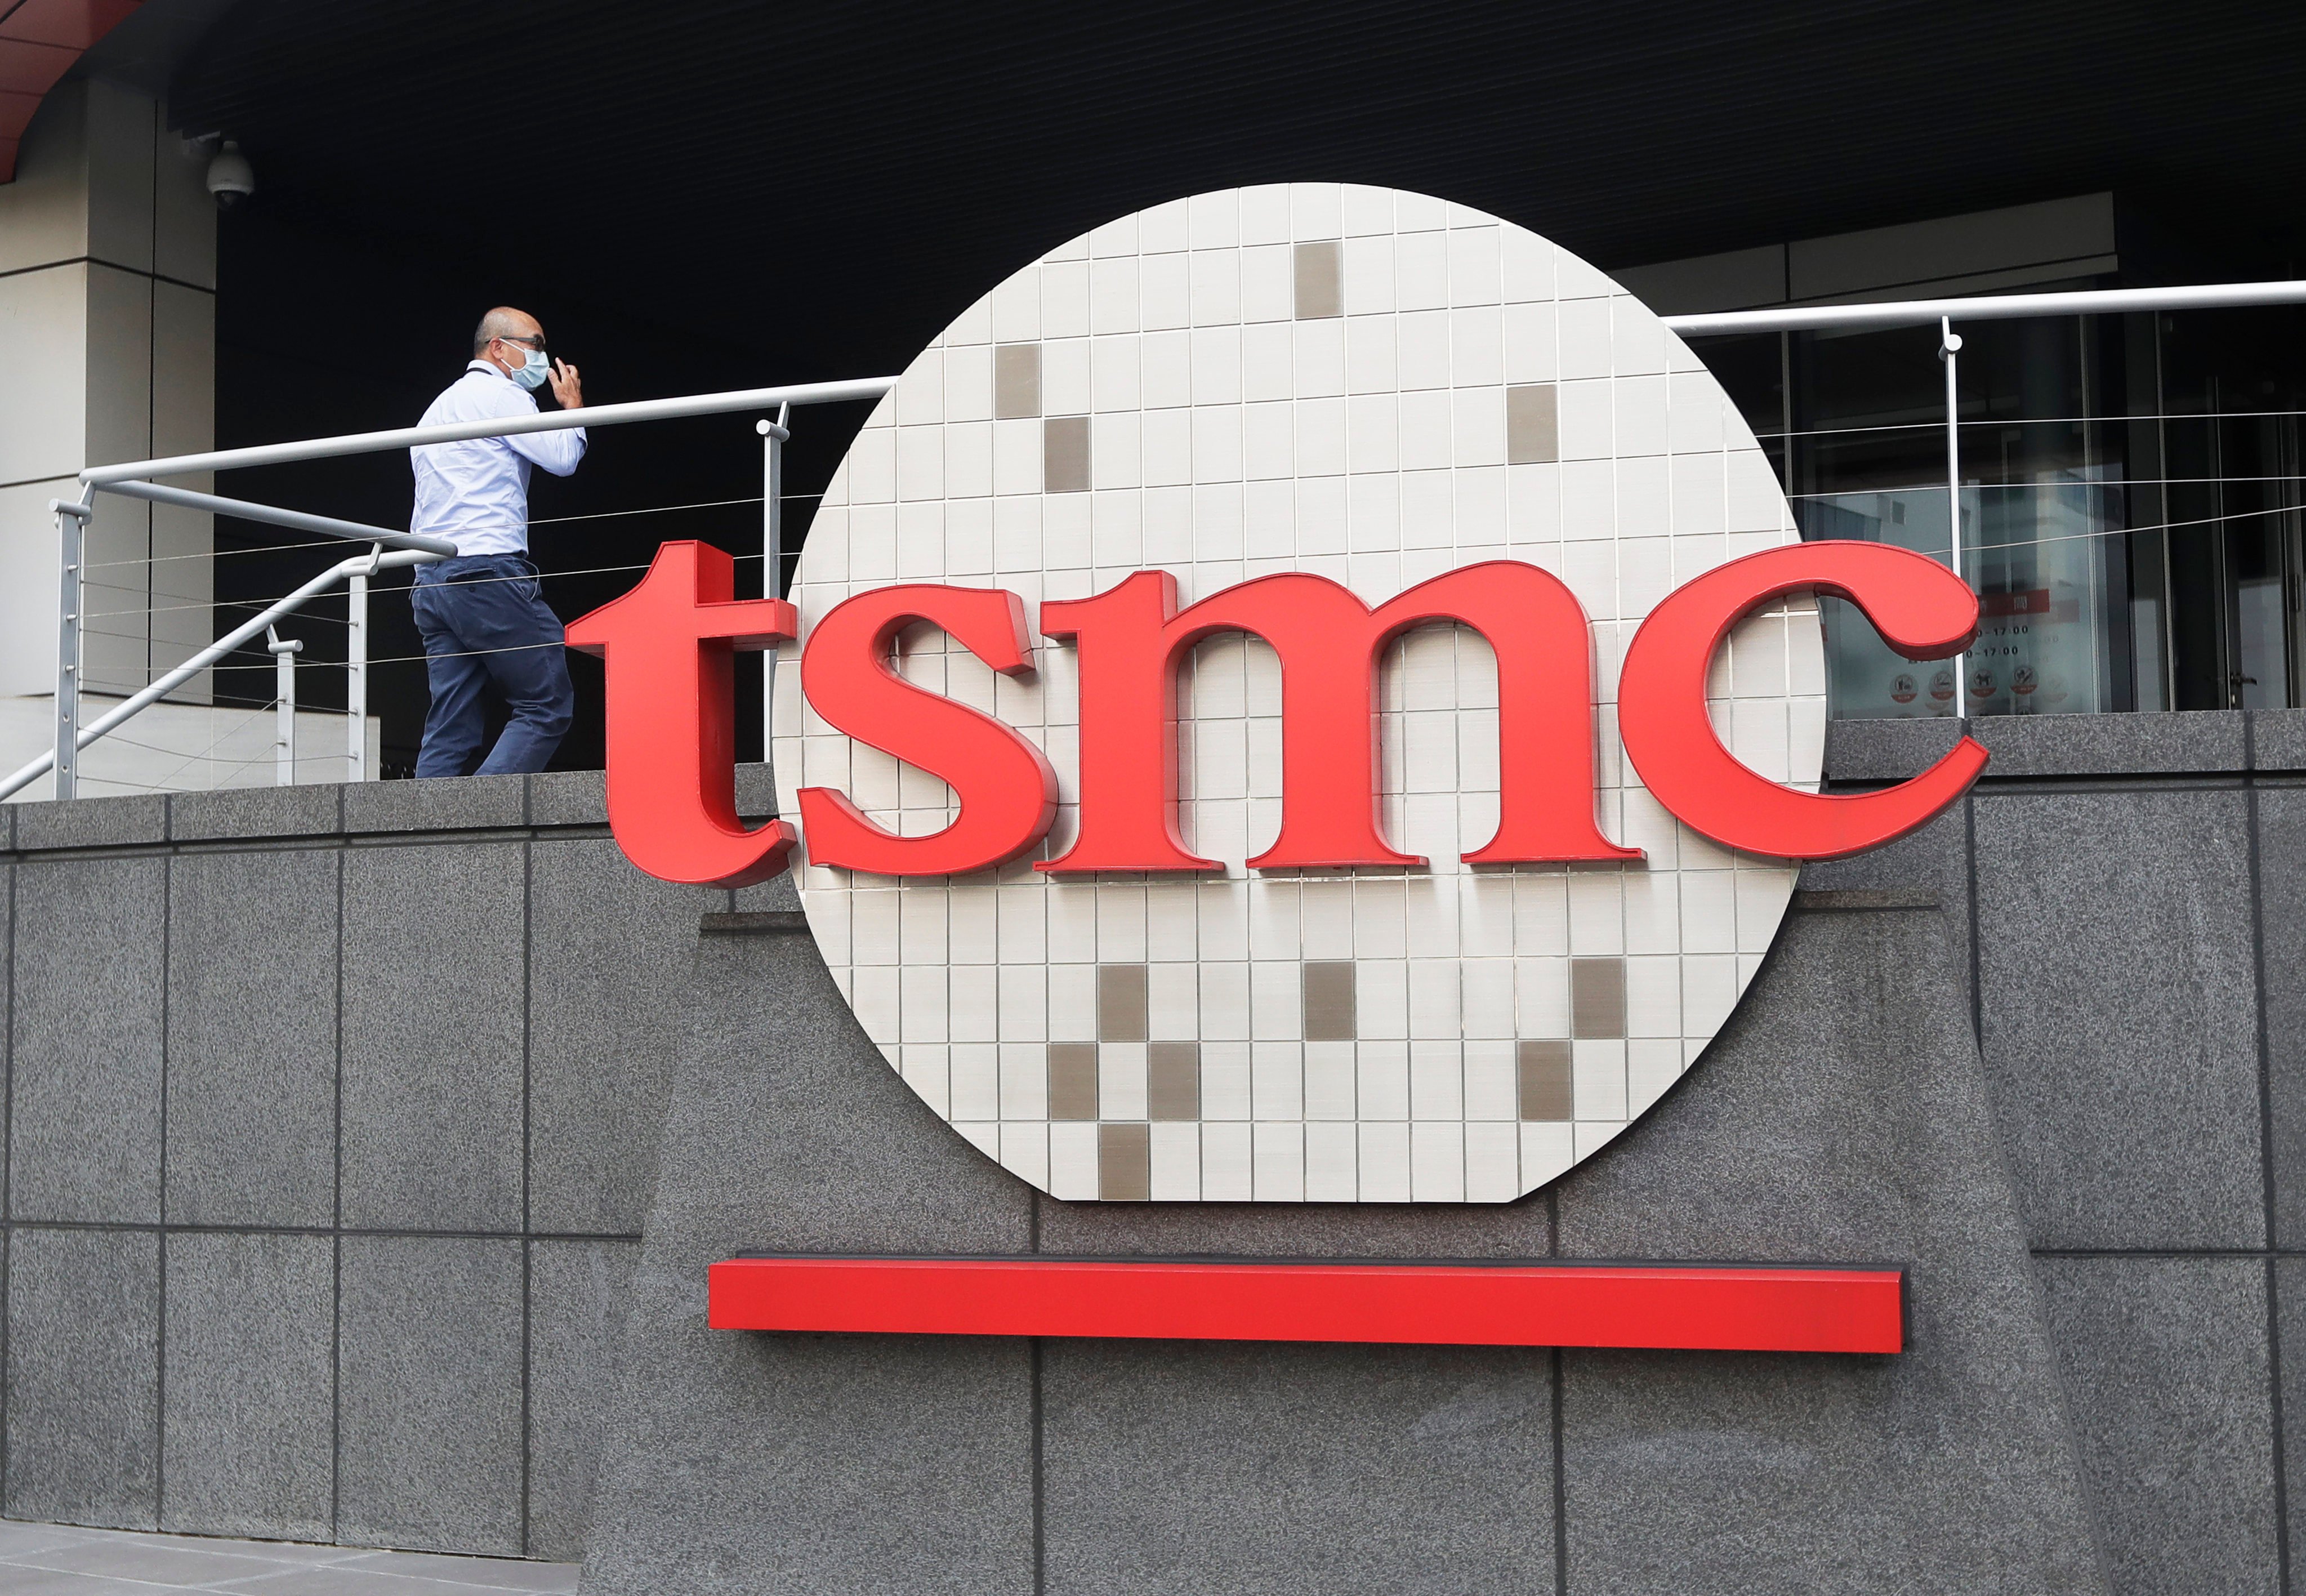 warren buffett bets us$5 billion on chipmaking with new stake in tsmc | south china morning post